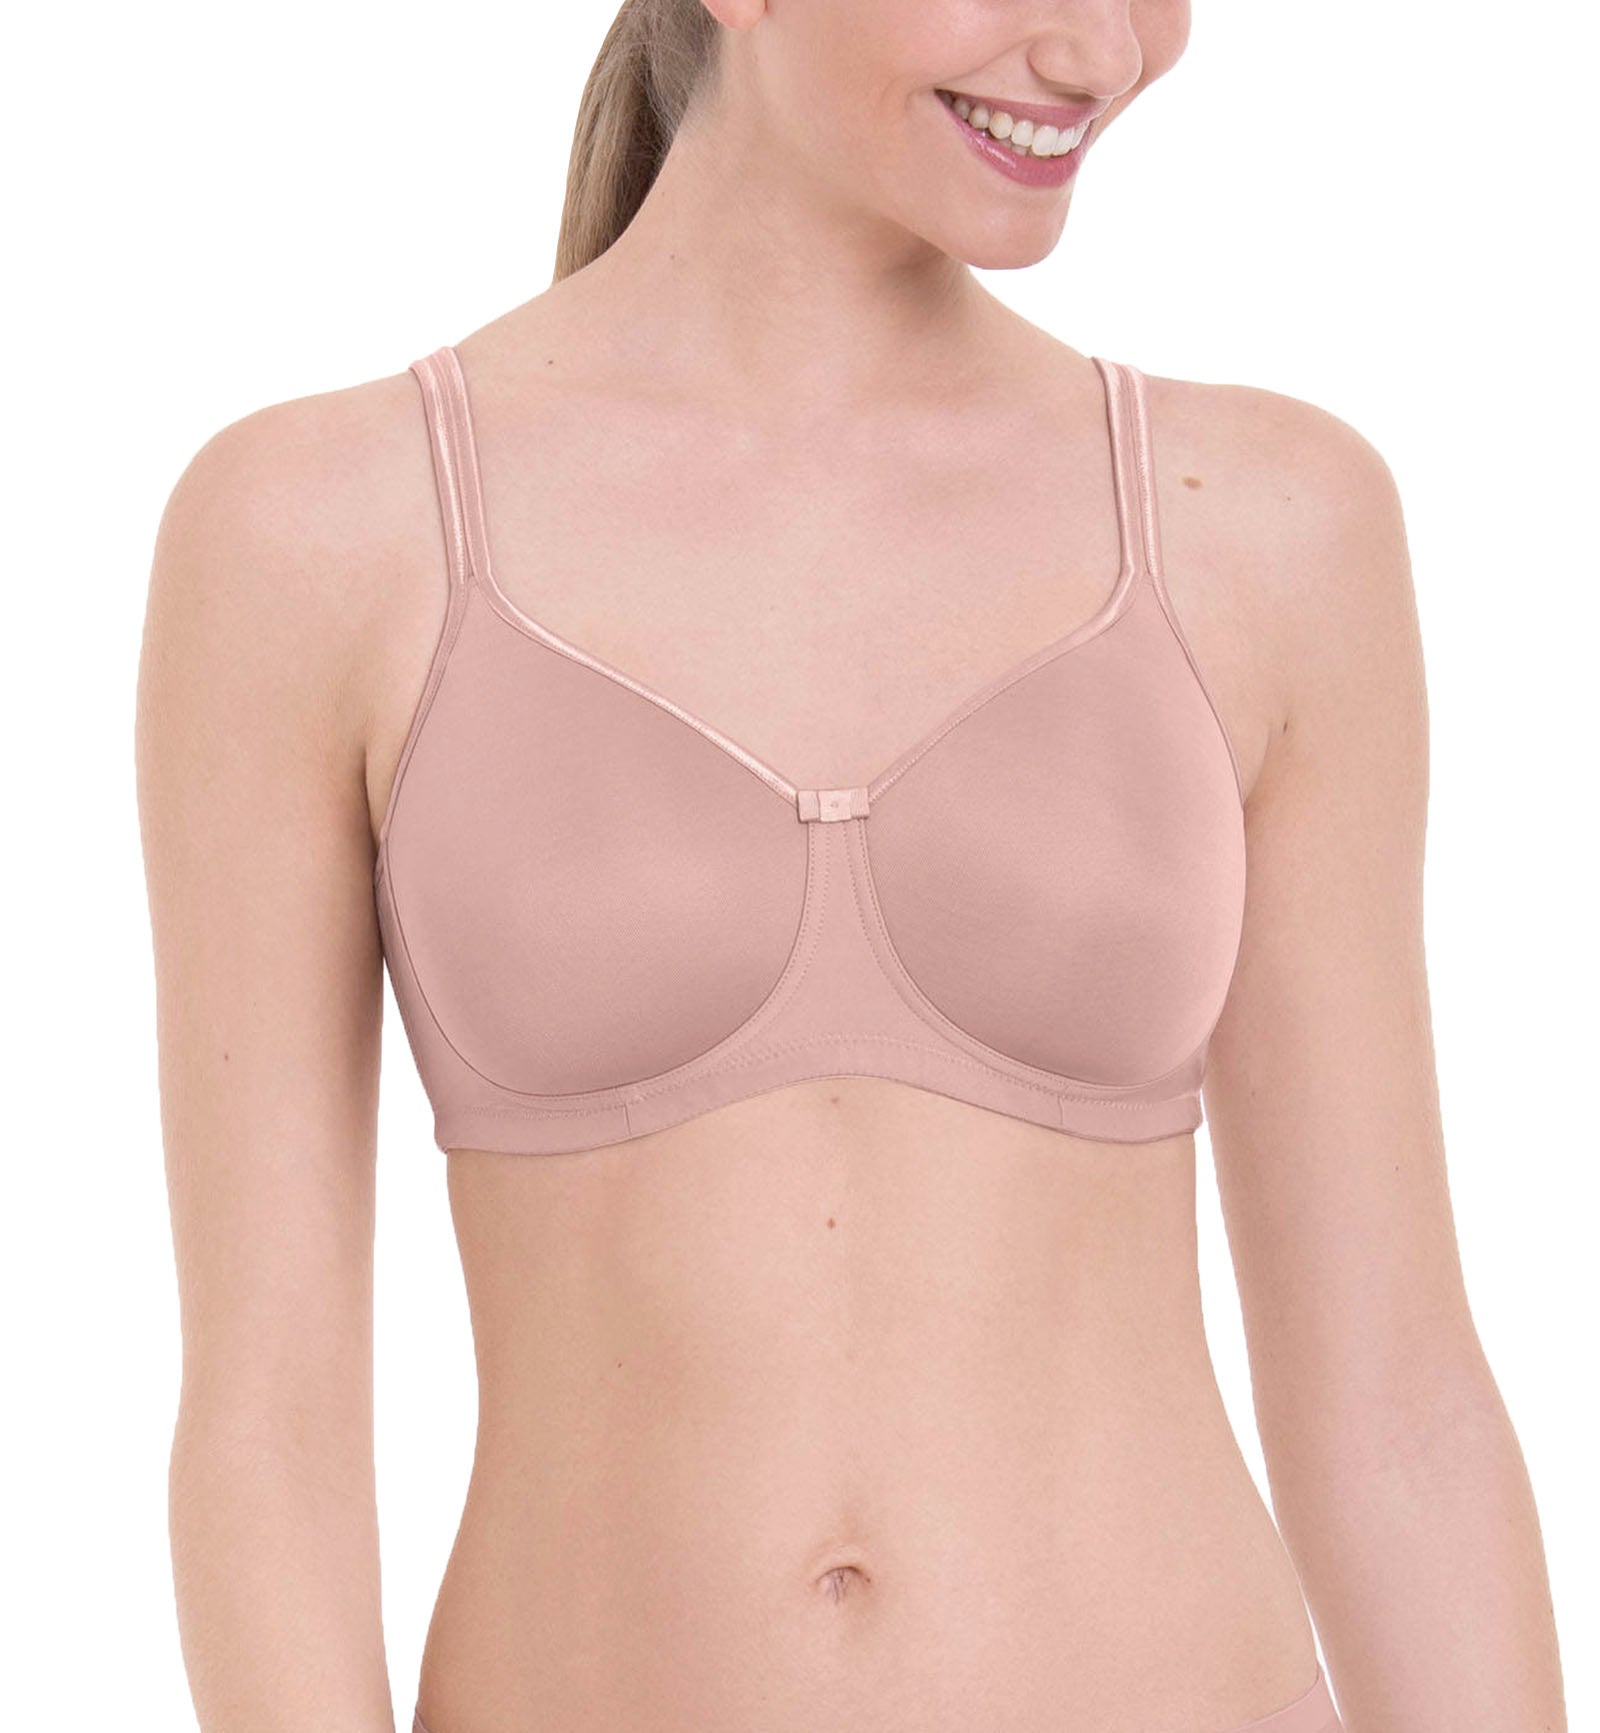 Silicone Breast Prosthesis by Anita - 1052X- Lightweight silicone